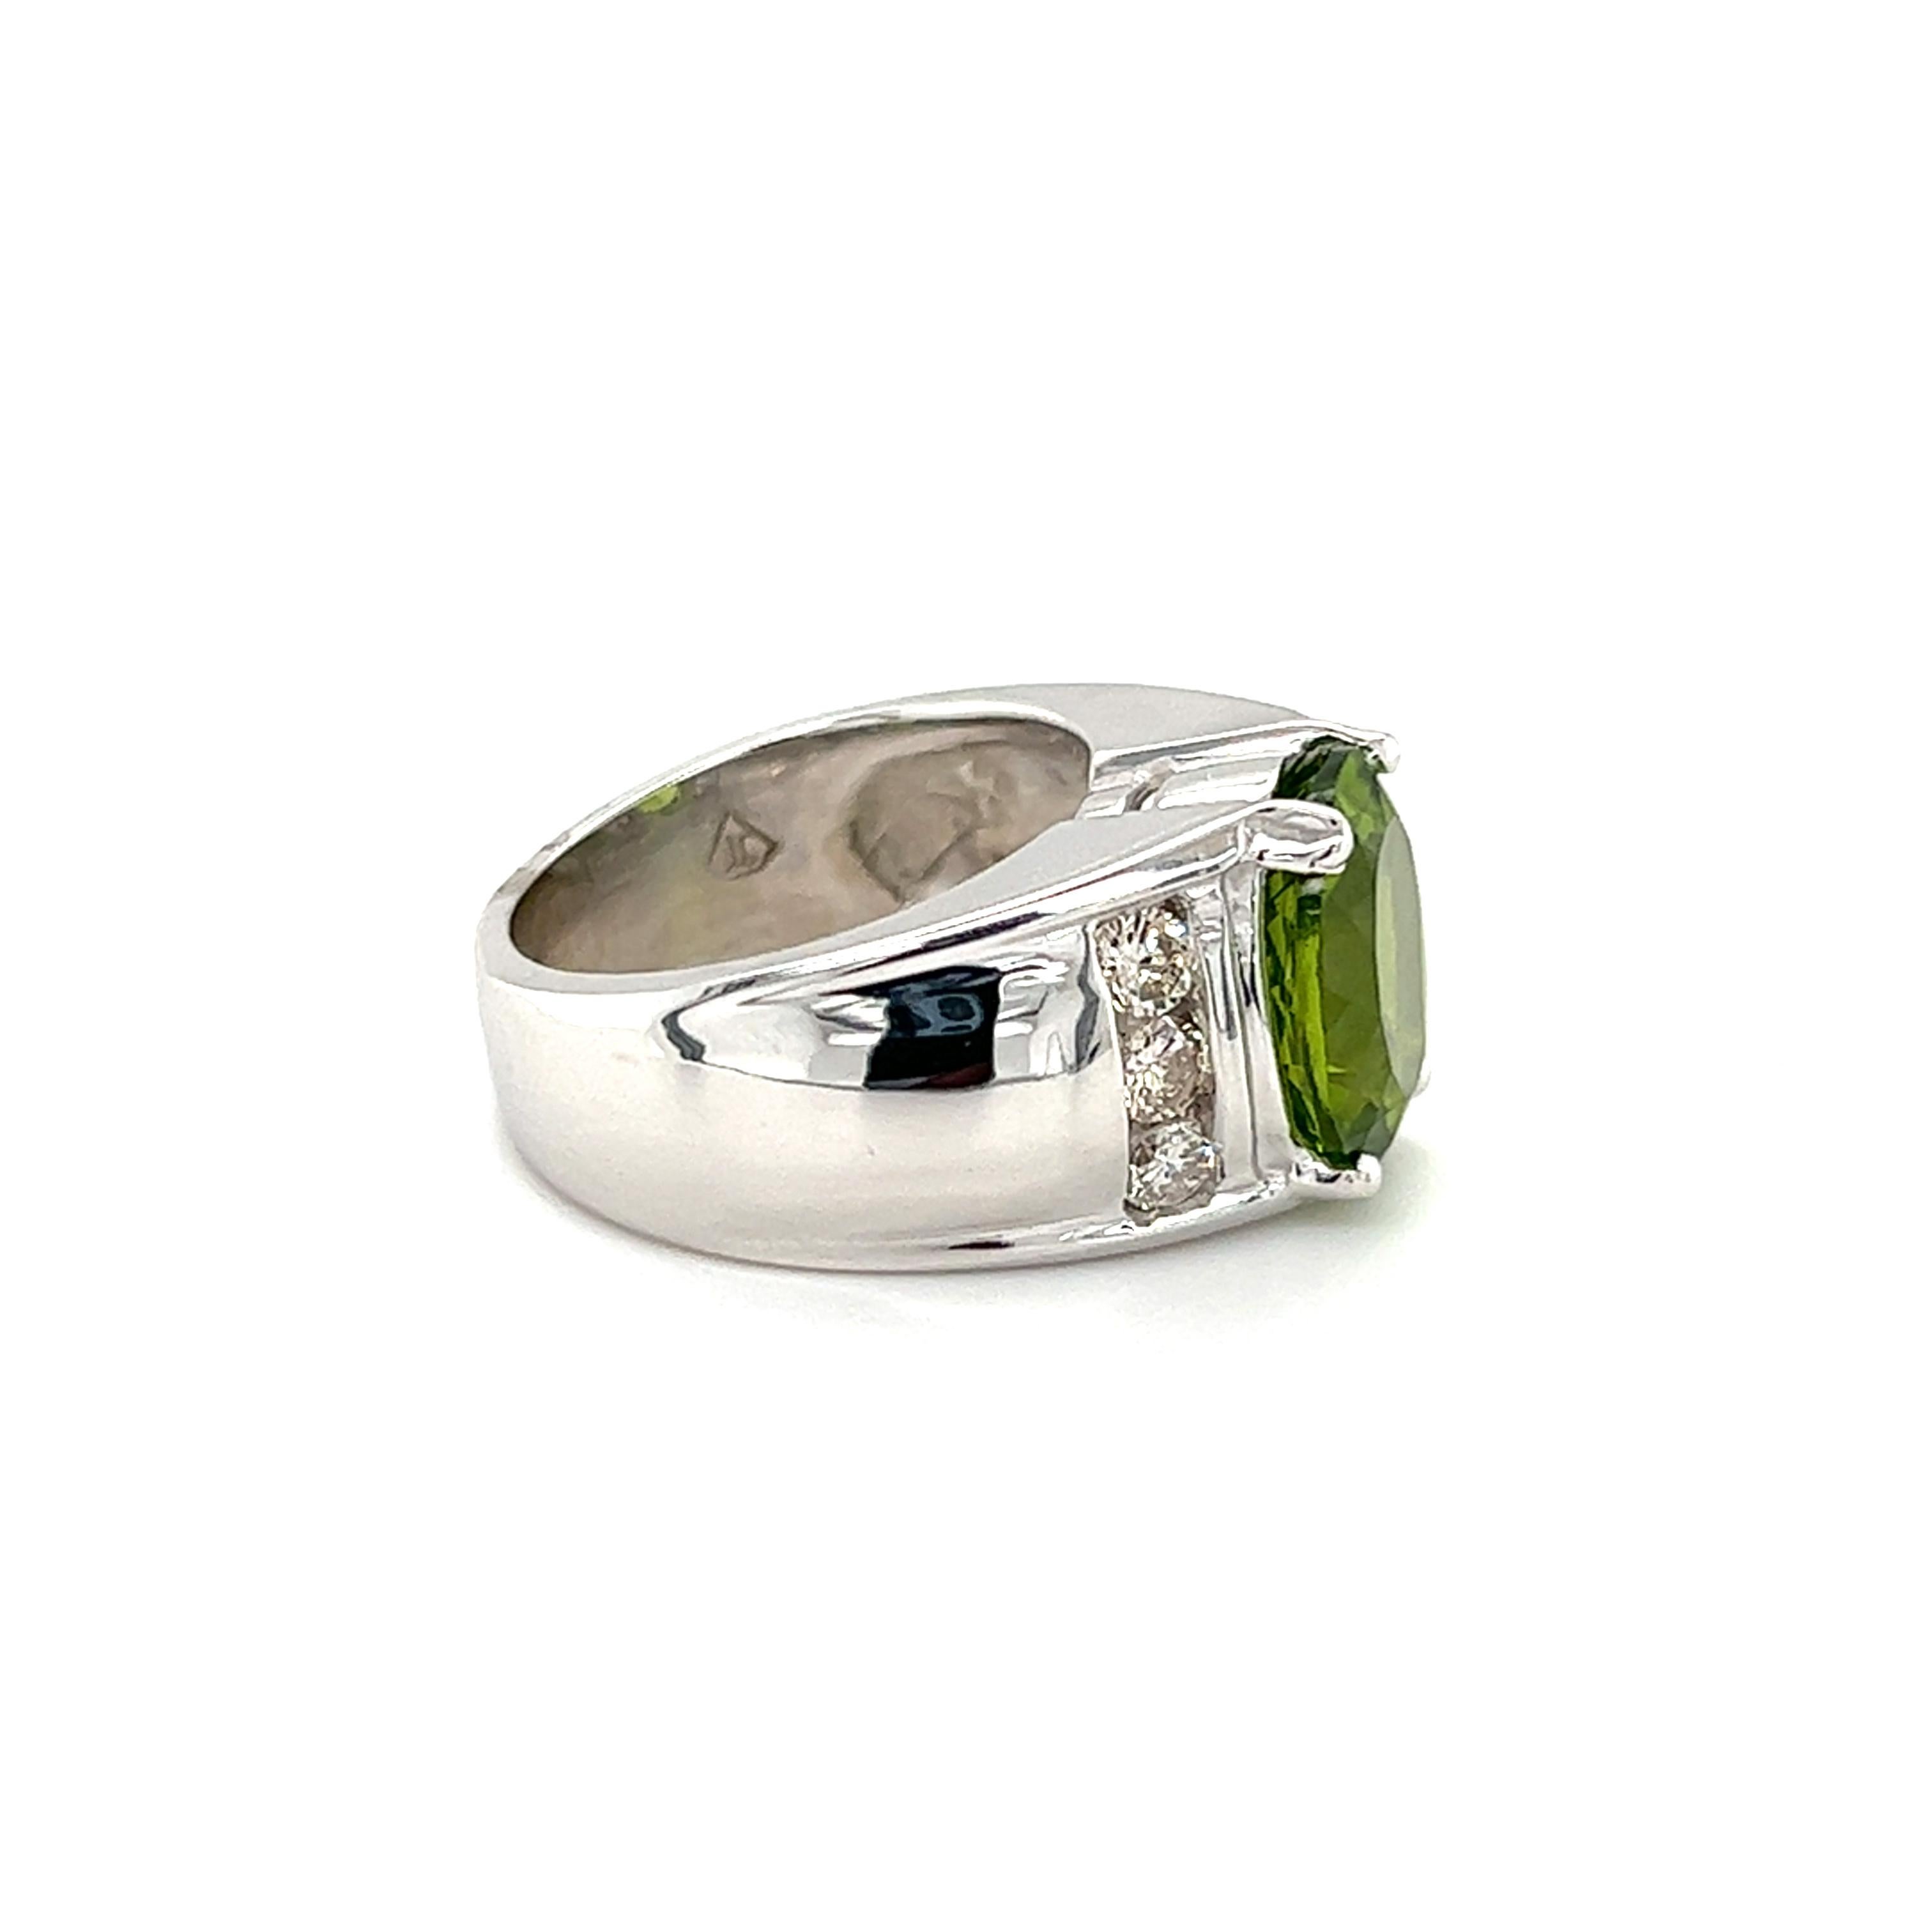 Contemporary 4.90 Carat Oval Peridot and Diamond Ring in 14K Gold